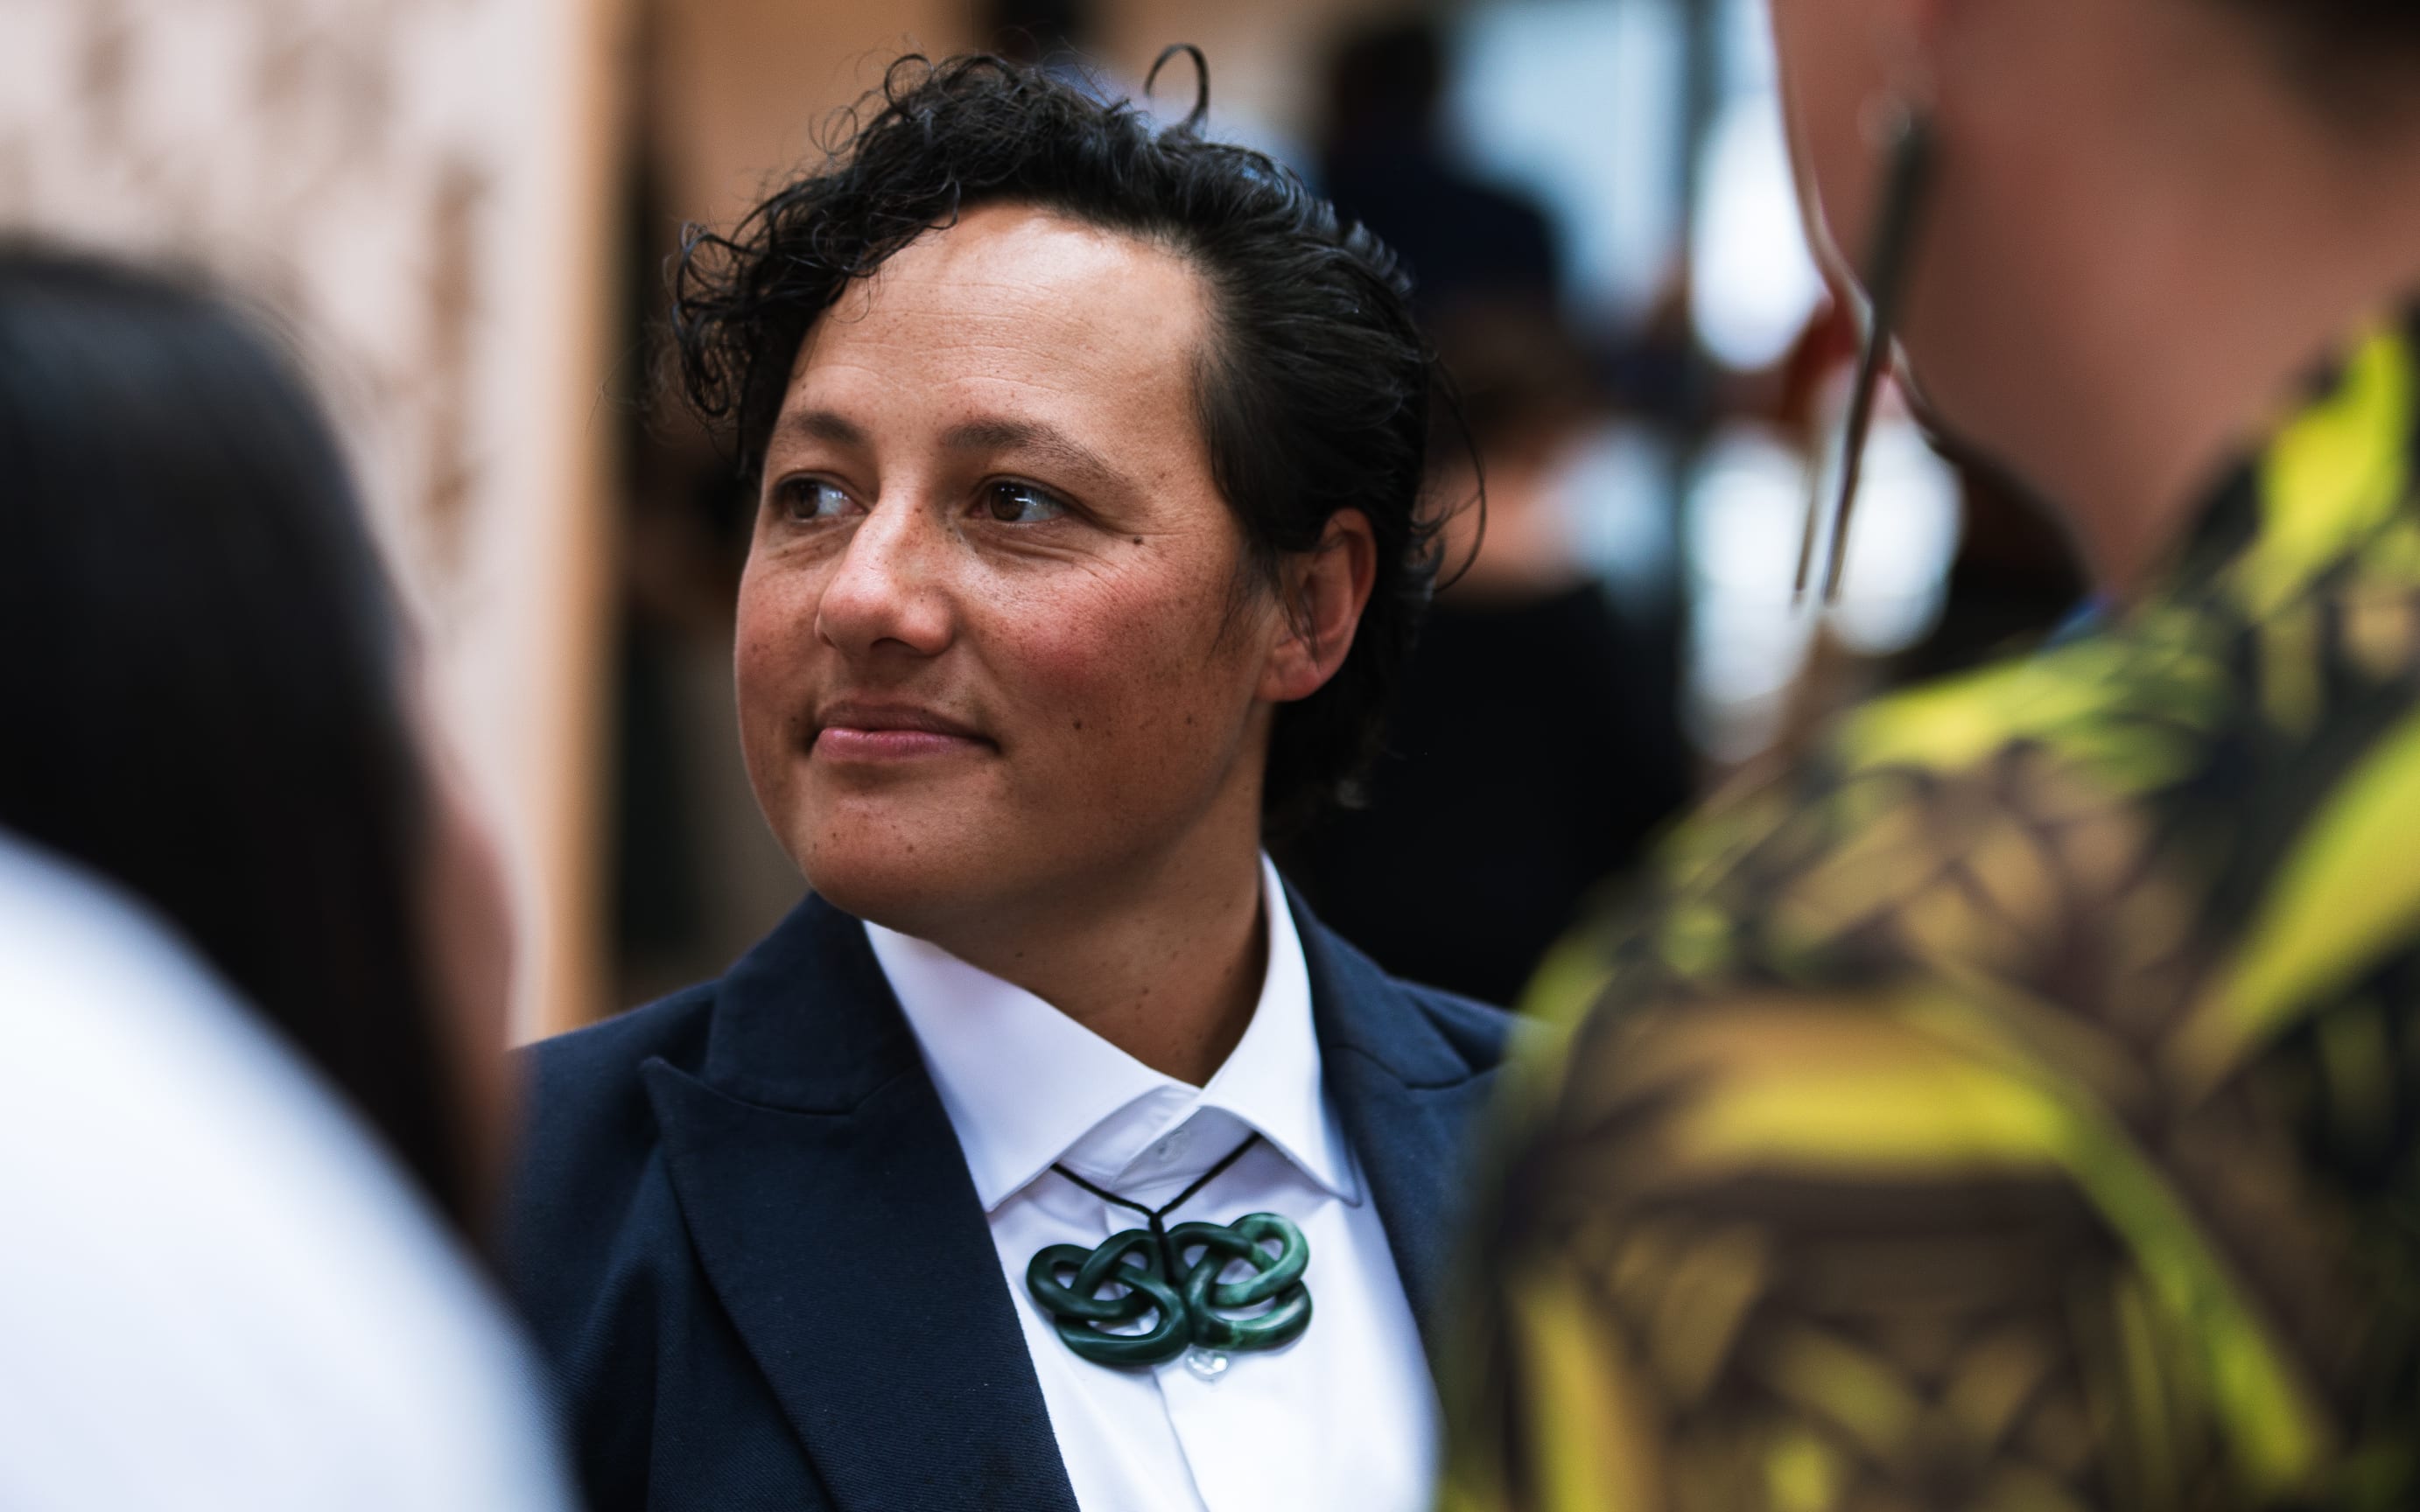 Minister of Conservation Kiri Allan at the Hihiaua Centre in Whangārei on 5 February, 2021